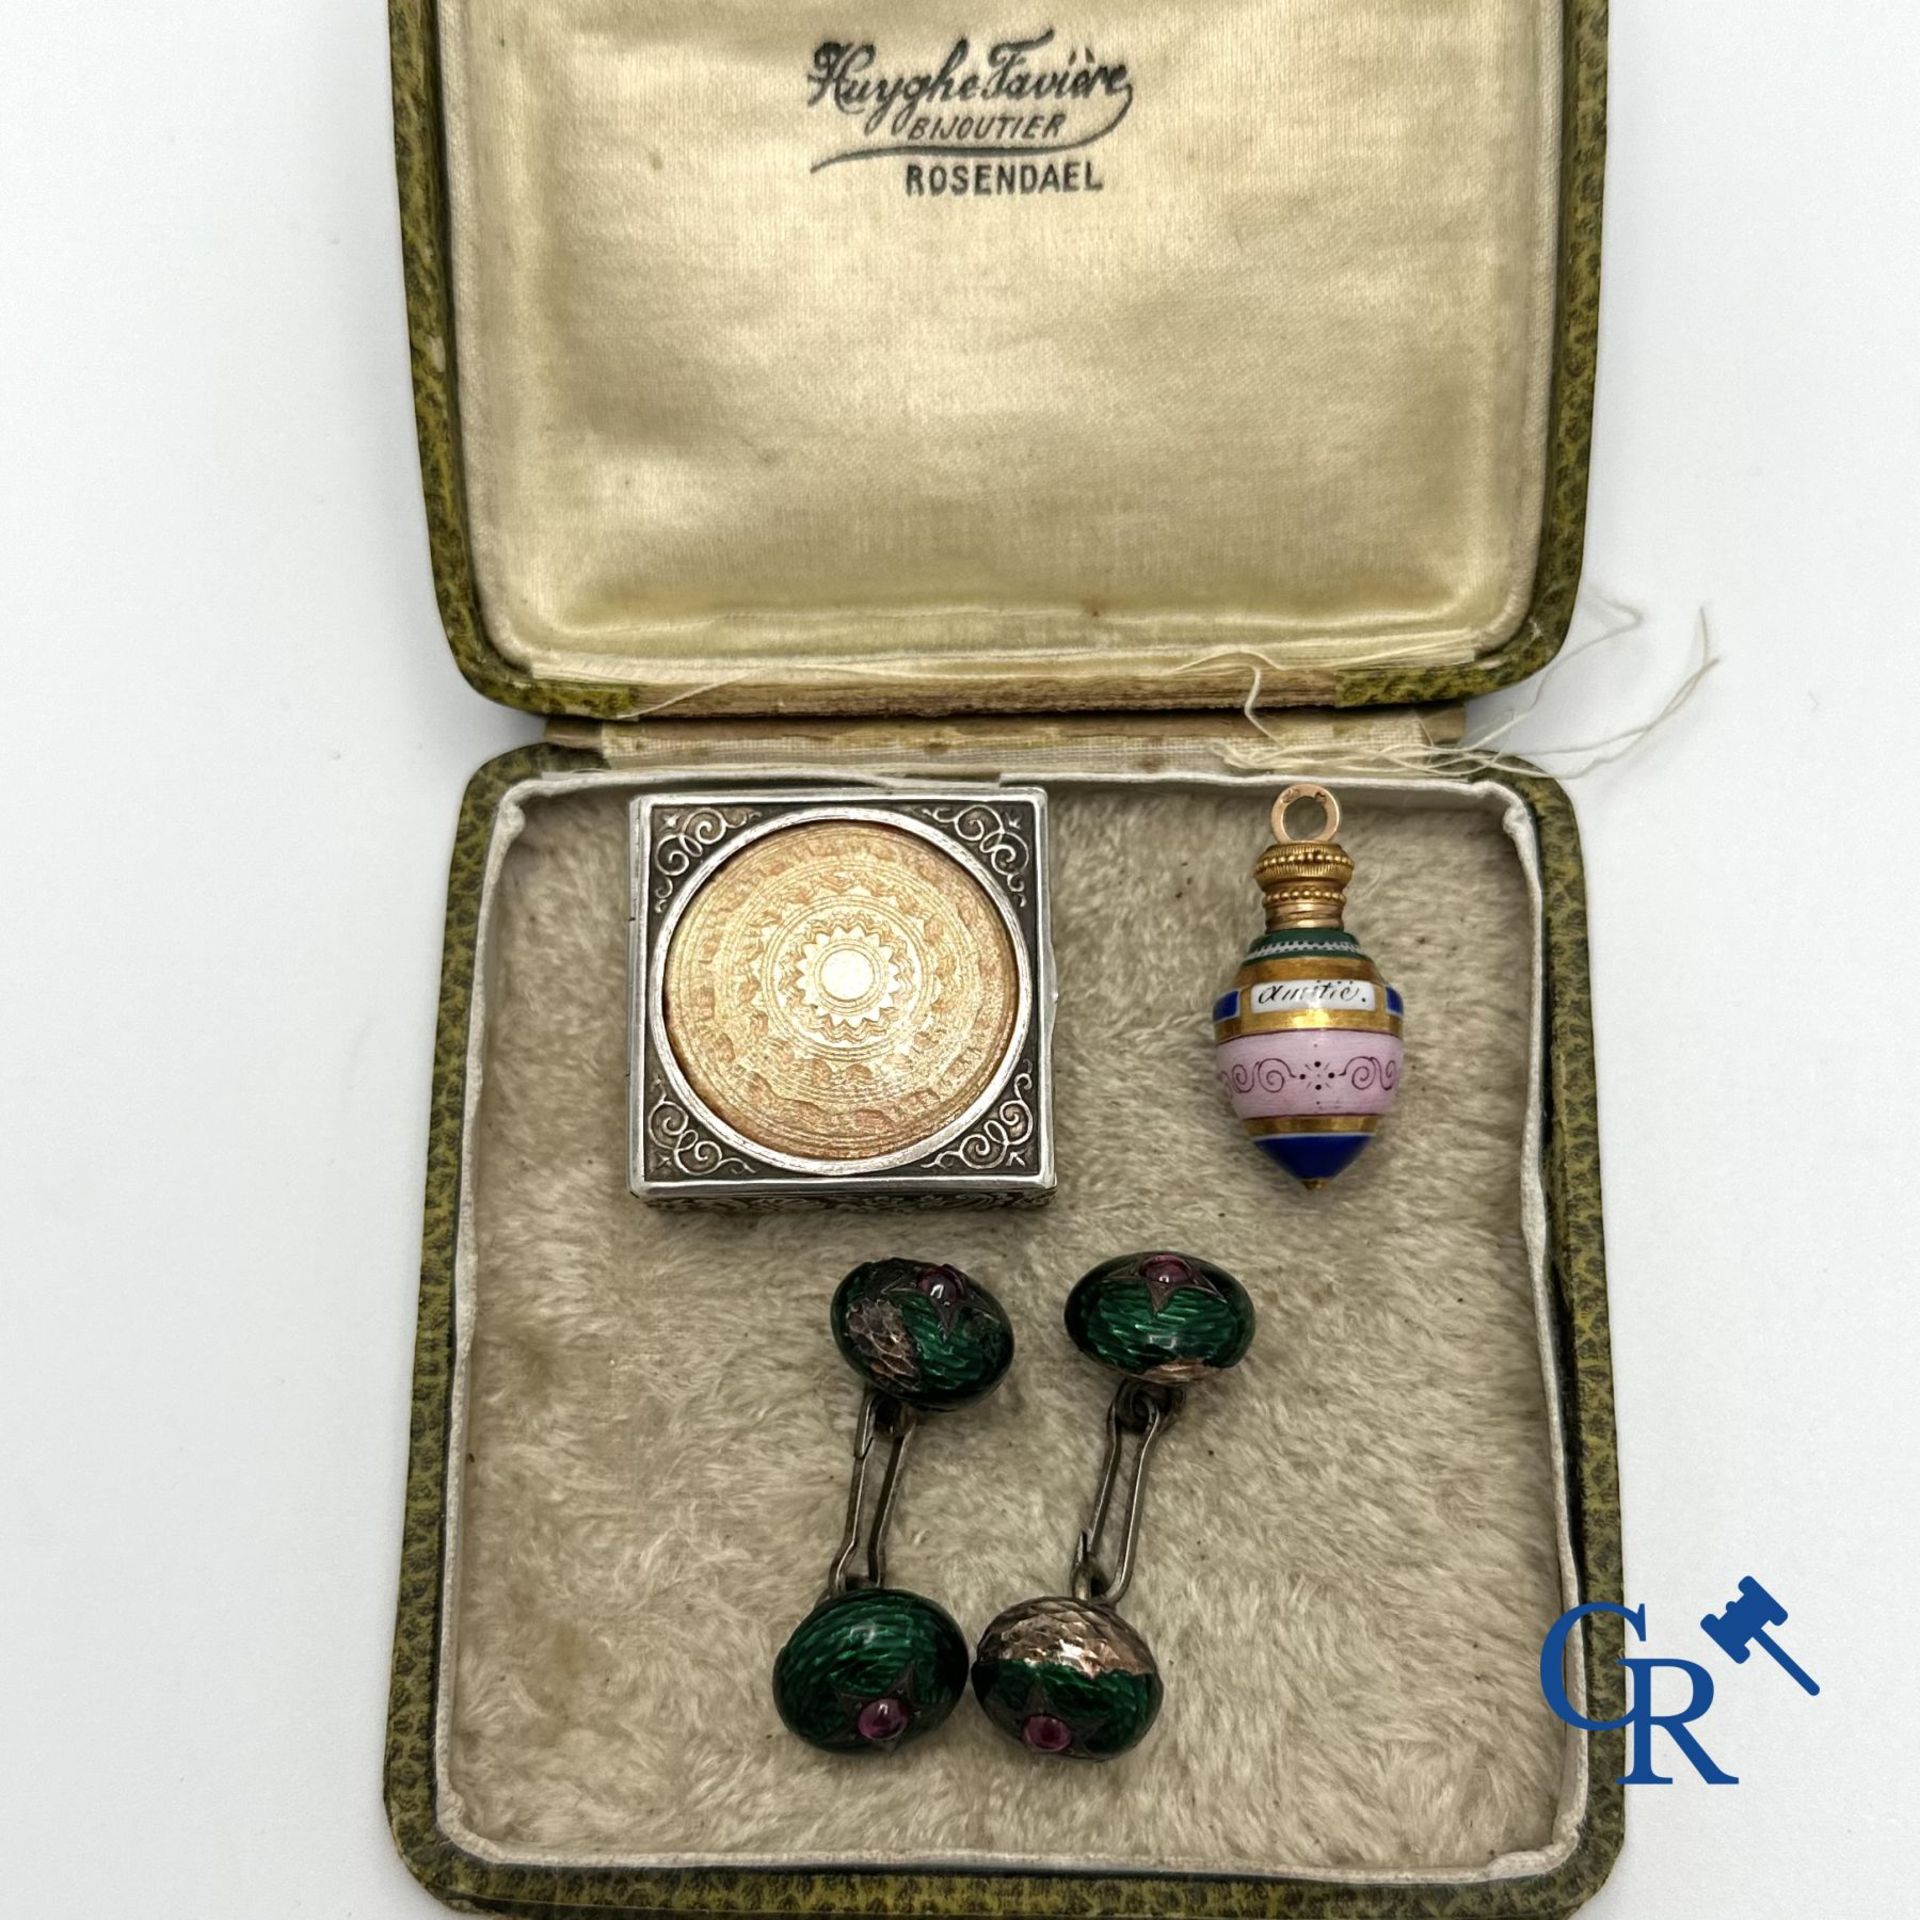 Jewellery: Russian work: Lot consisting of a pendant in gold , a pill box and cufflinks in silver.